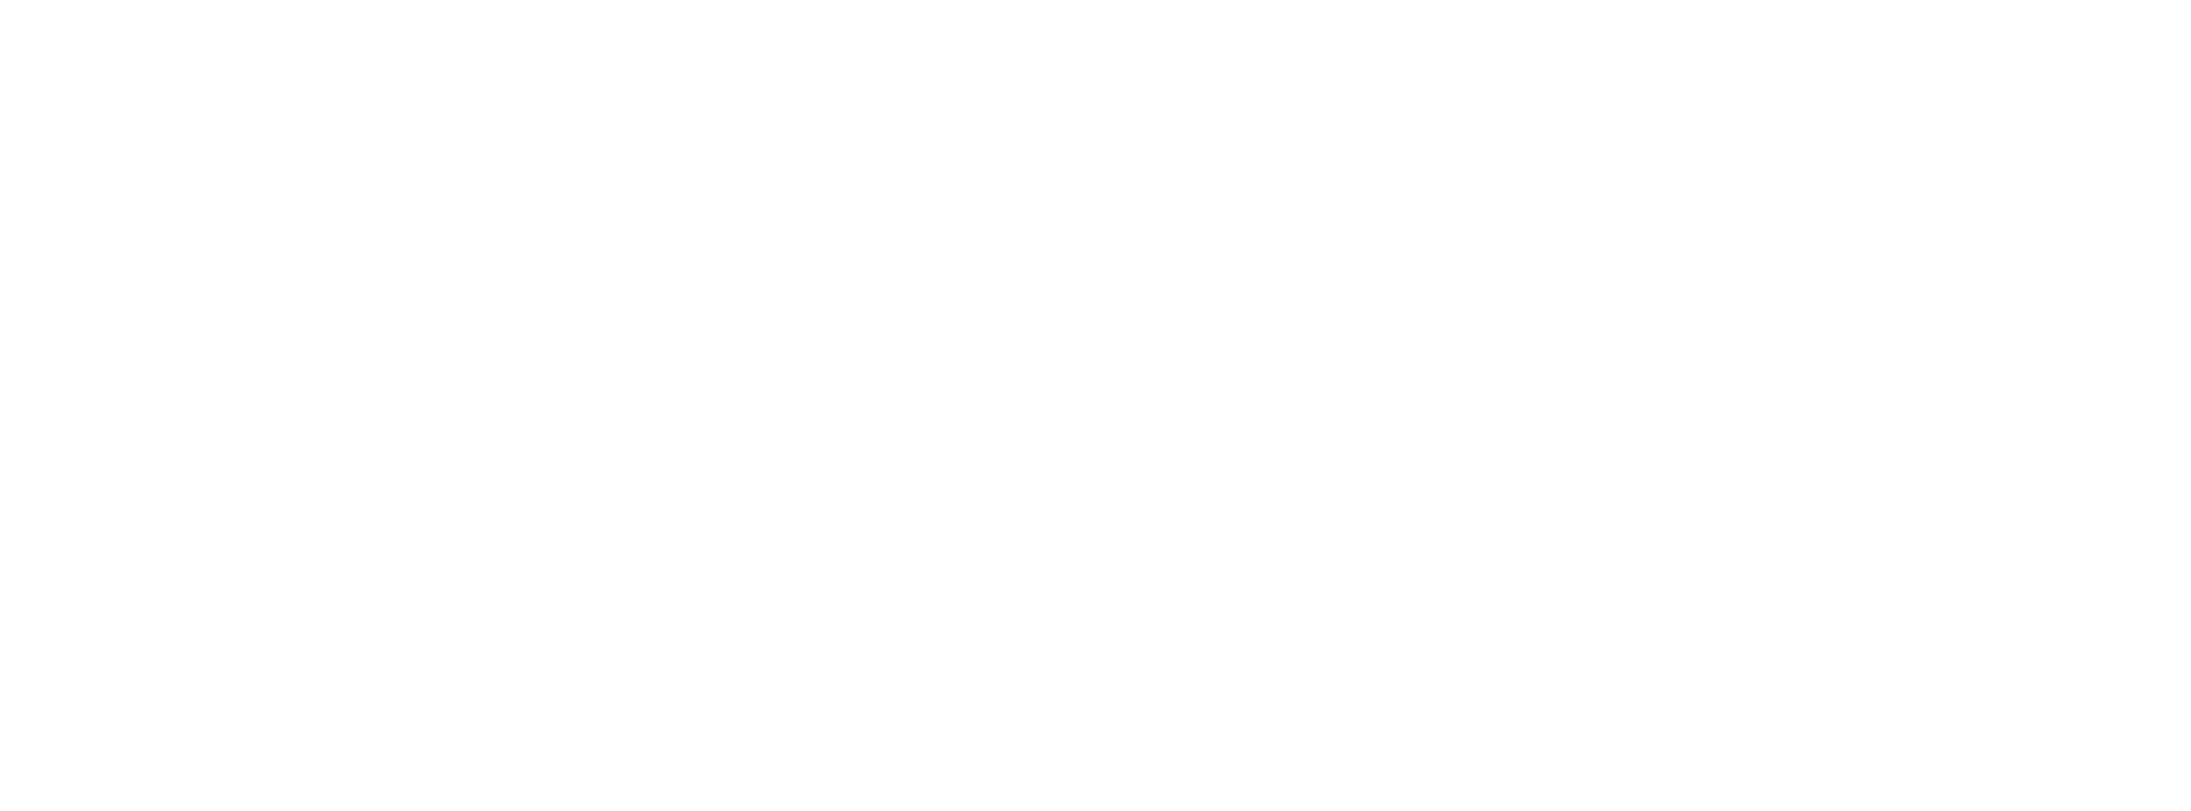 A White Object On A Black Background